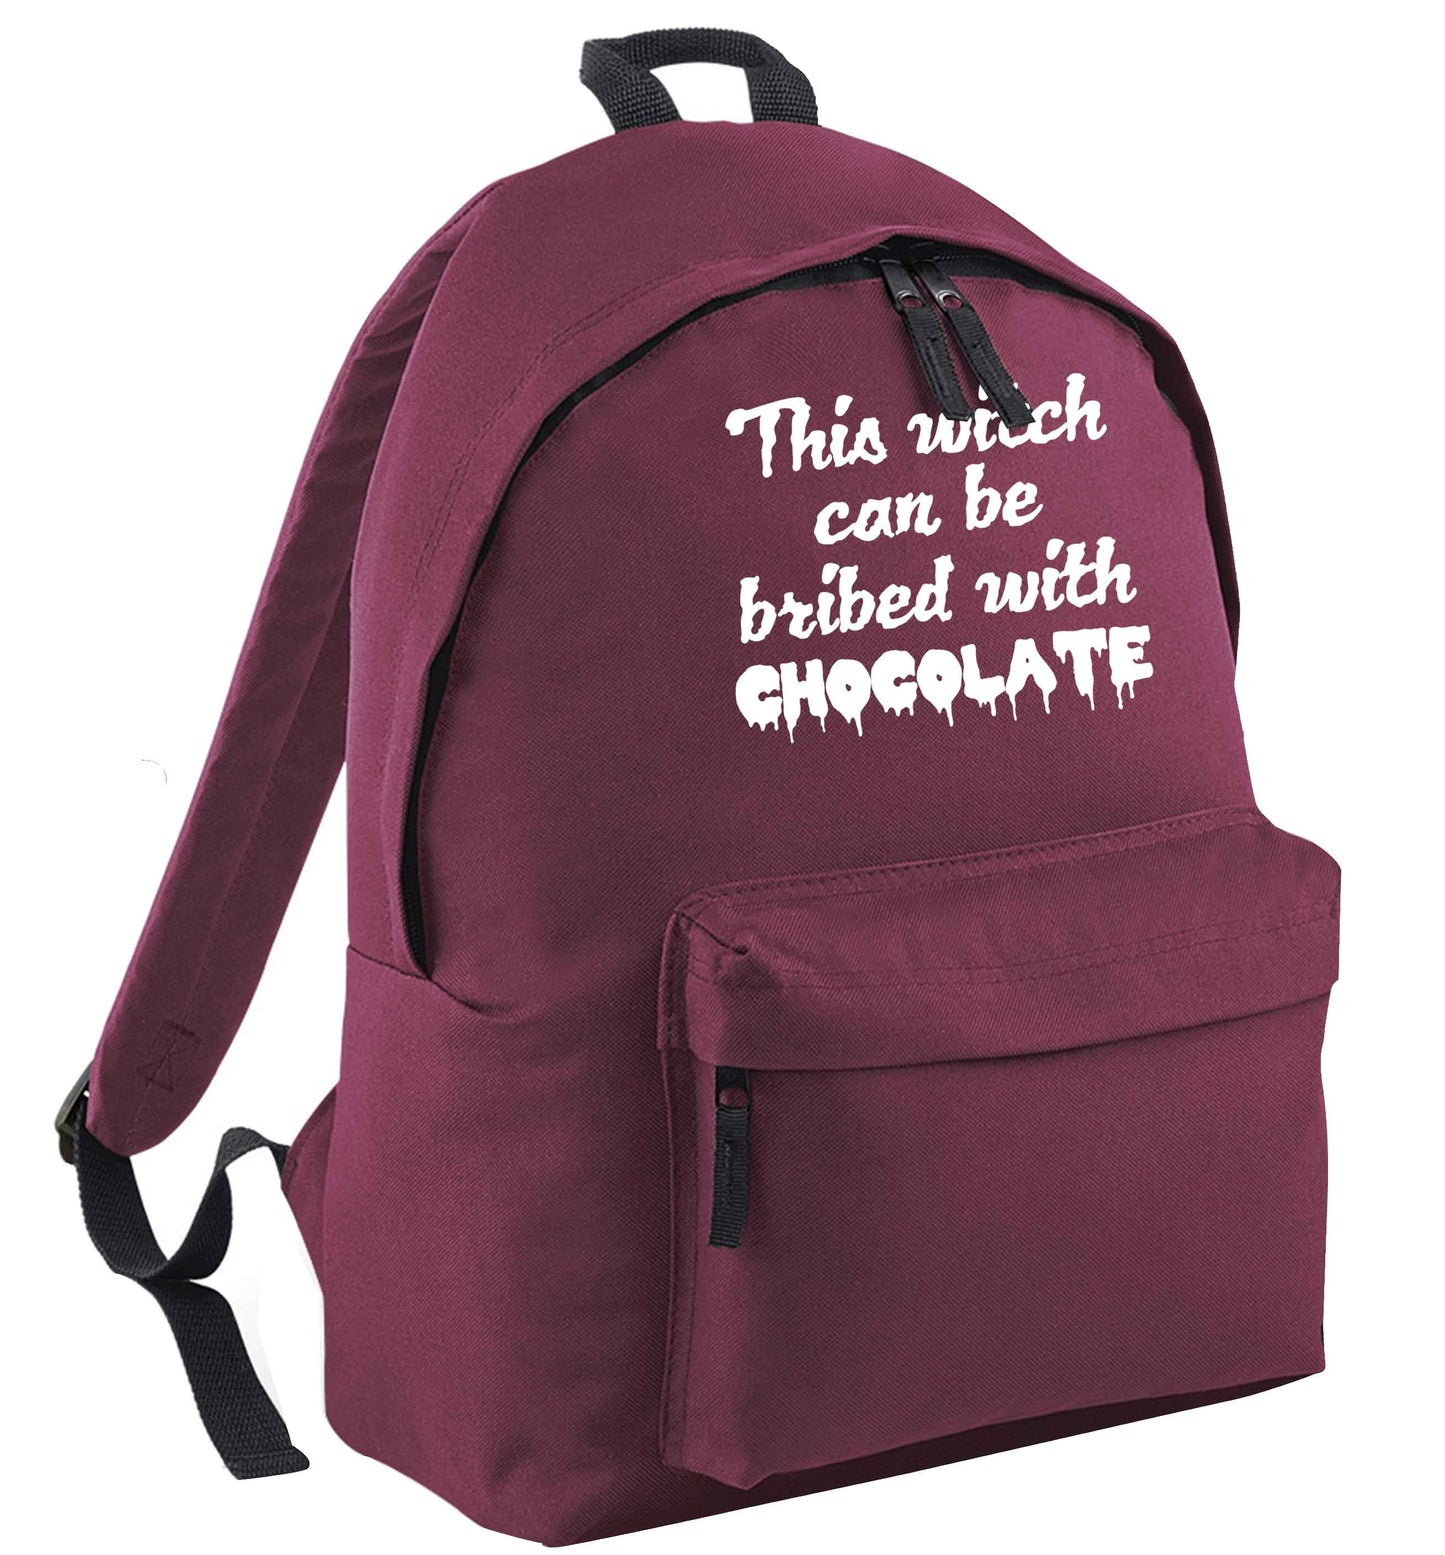 This witch can be bribed with chocolate | Children's backpack